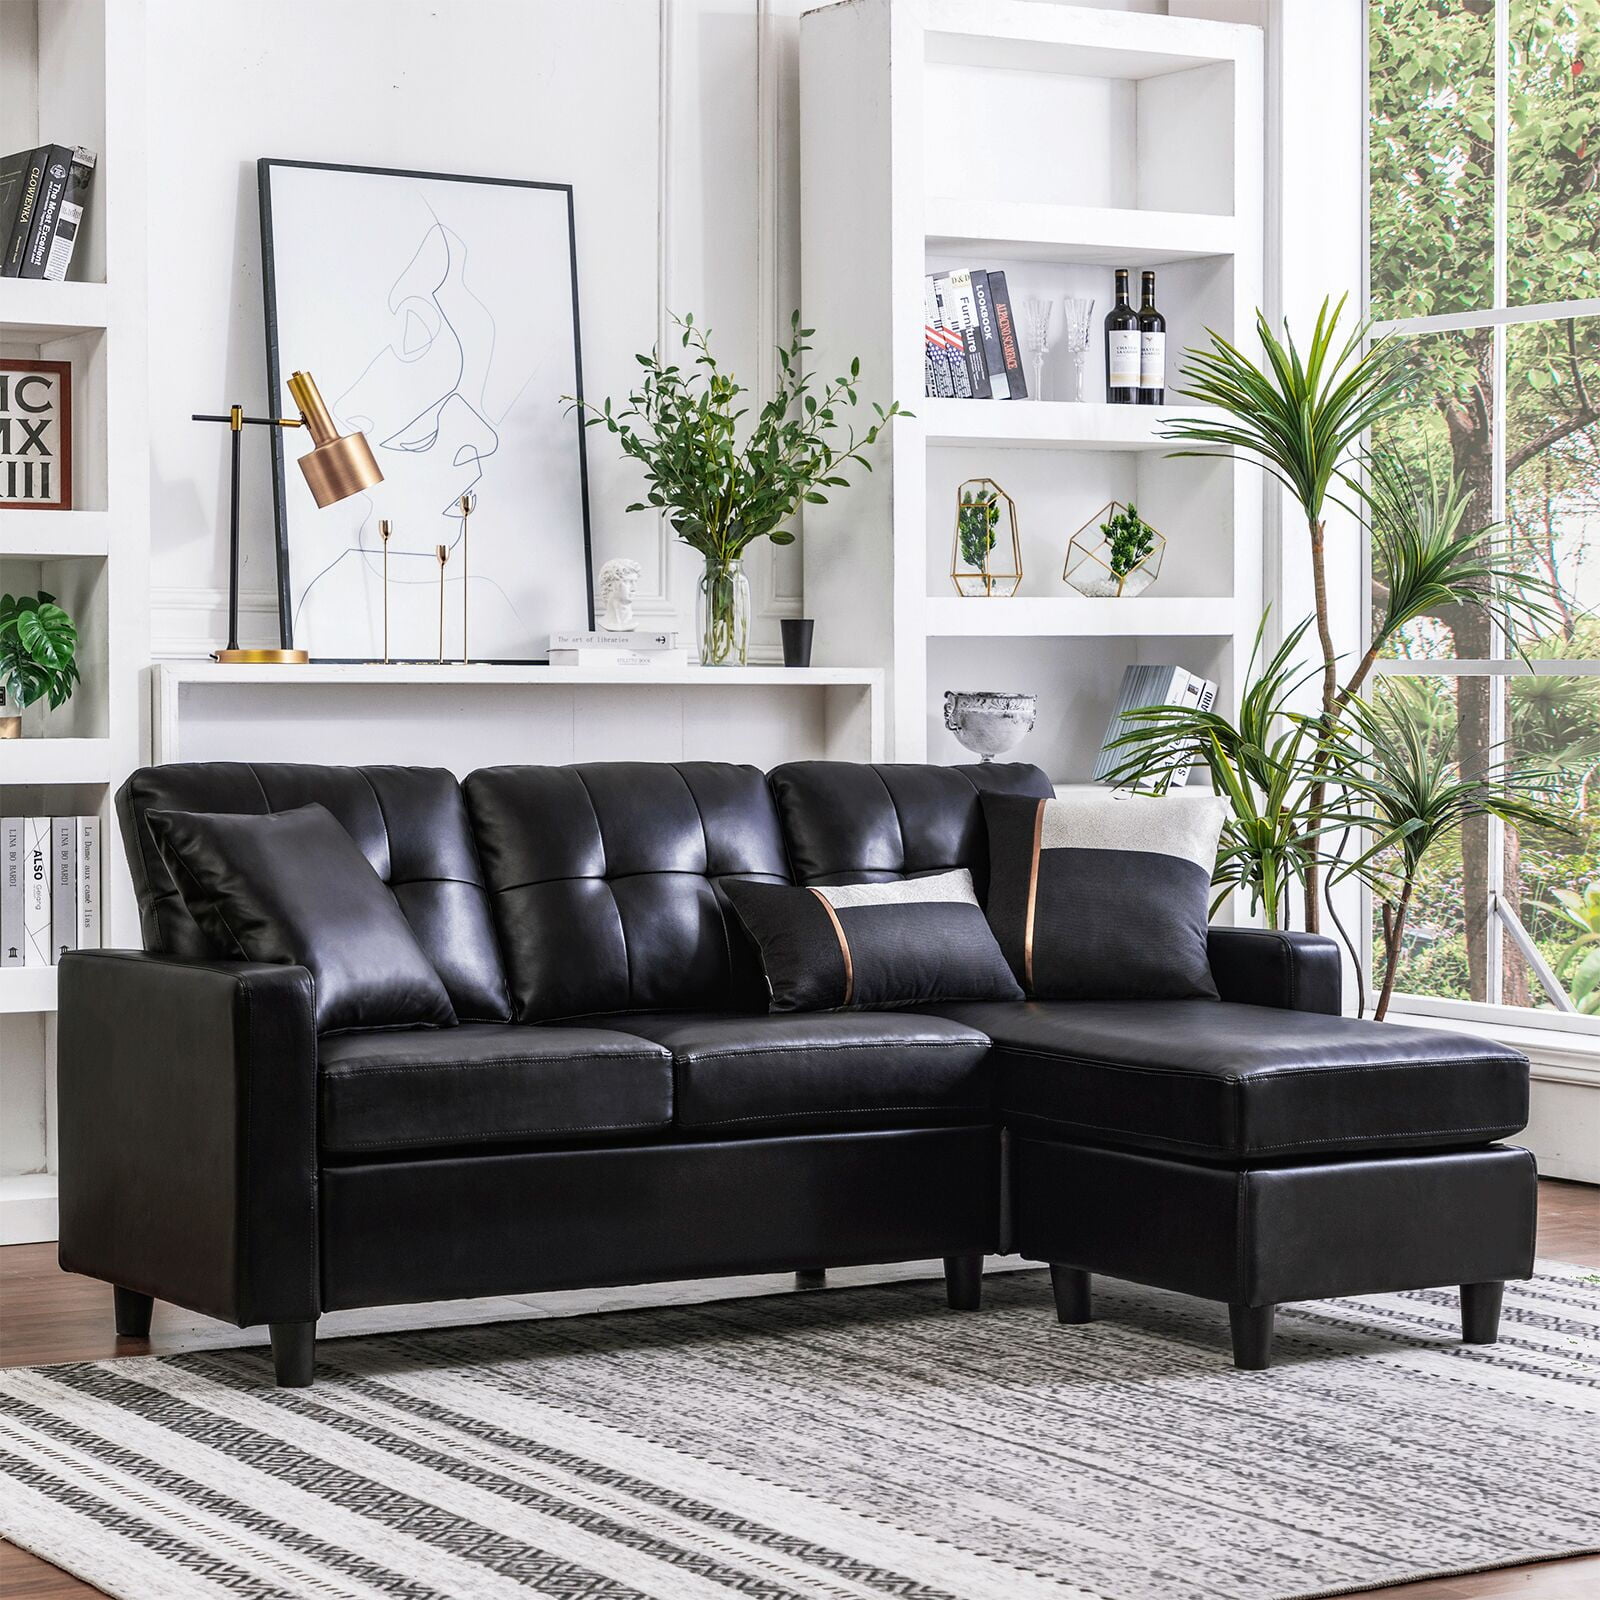 Honbay Faux Leather Sectional Sofa L, L Shaped Black Leather Sofa